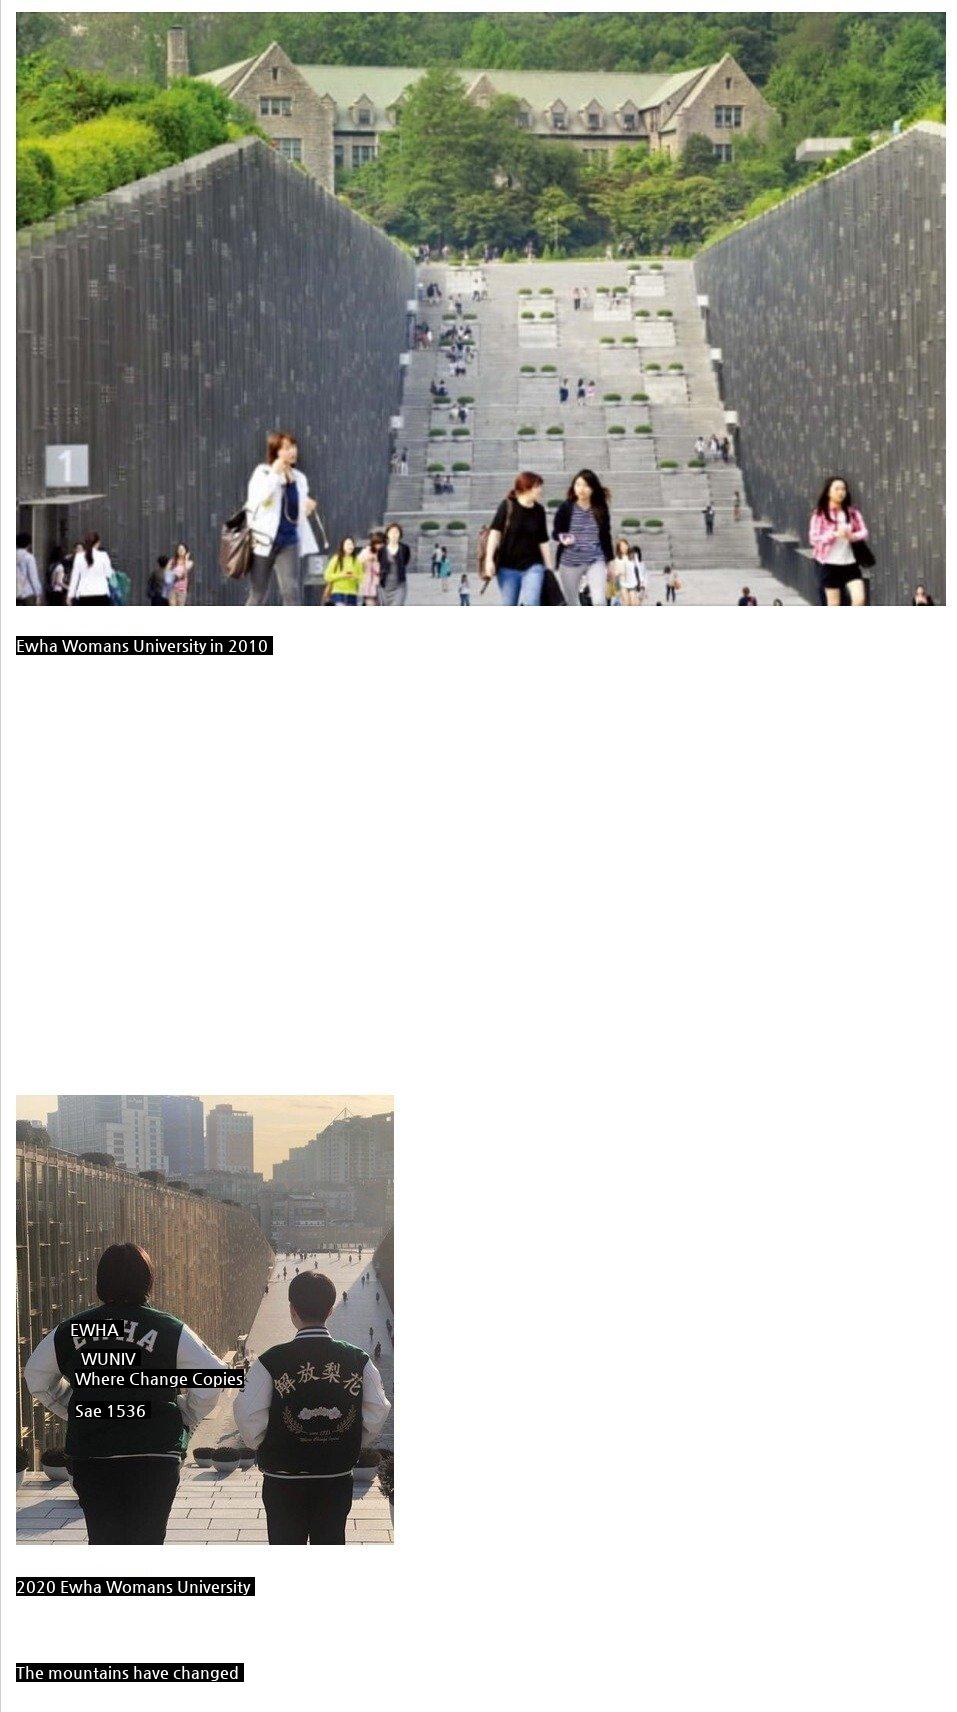 The difference between 10 years ago and after Ewha Womans University.jpg